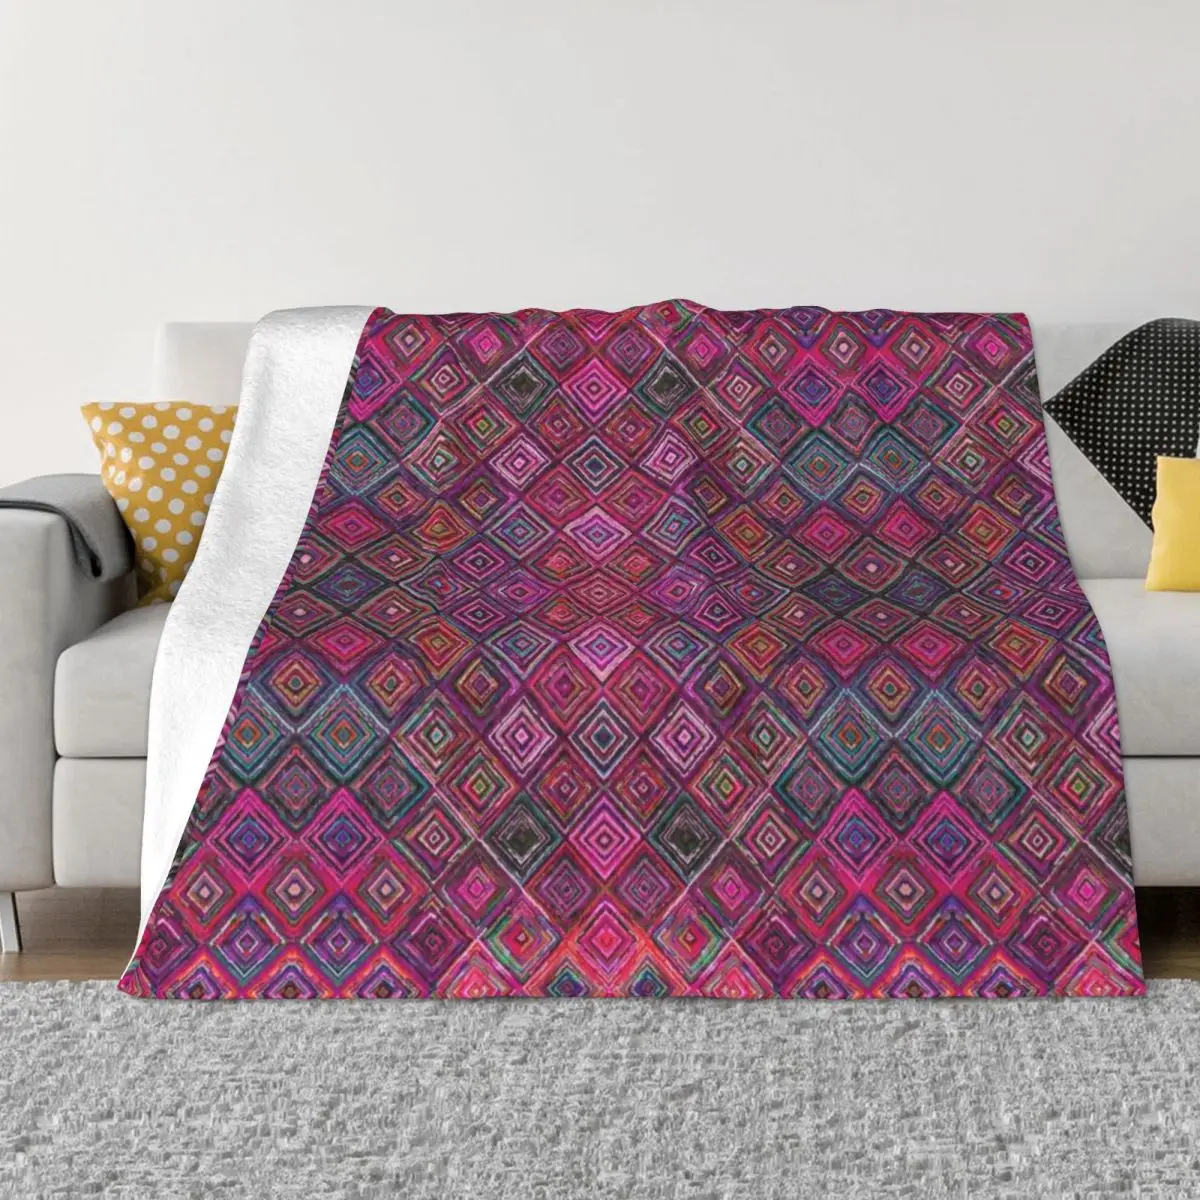 

Colored illusions Oriental Traditional Moroccan Style Throw Blanket Luxury St Blanket Hair Blanket Sofa Throw Blanket anime